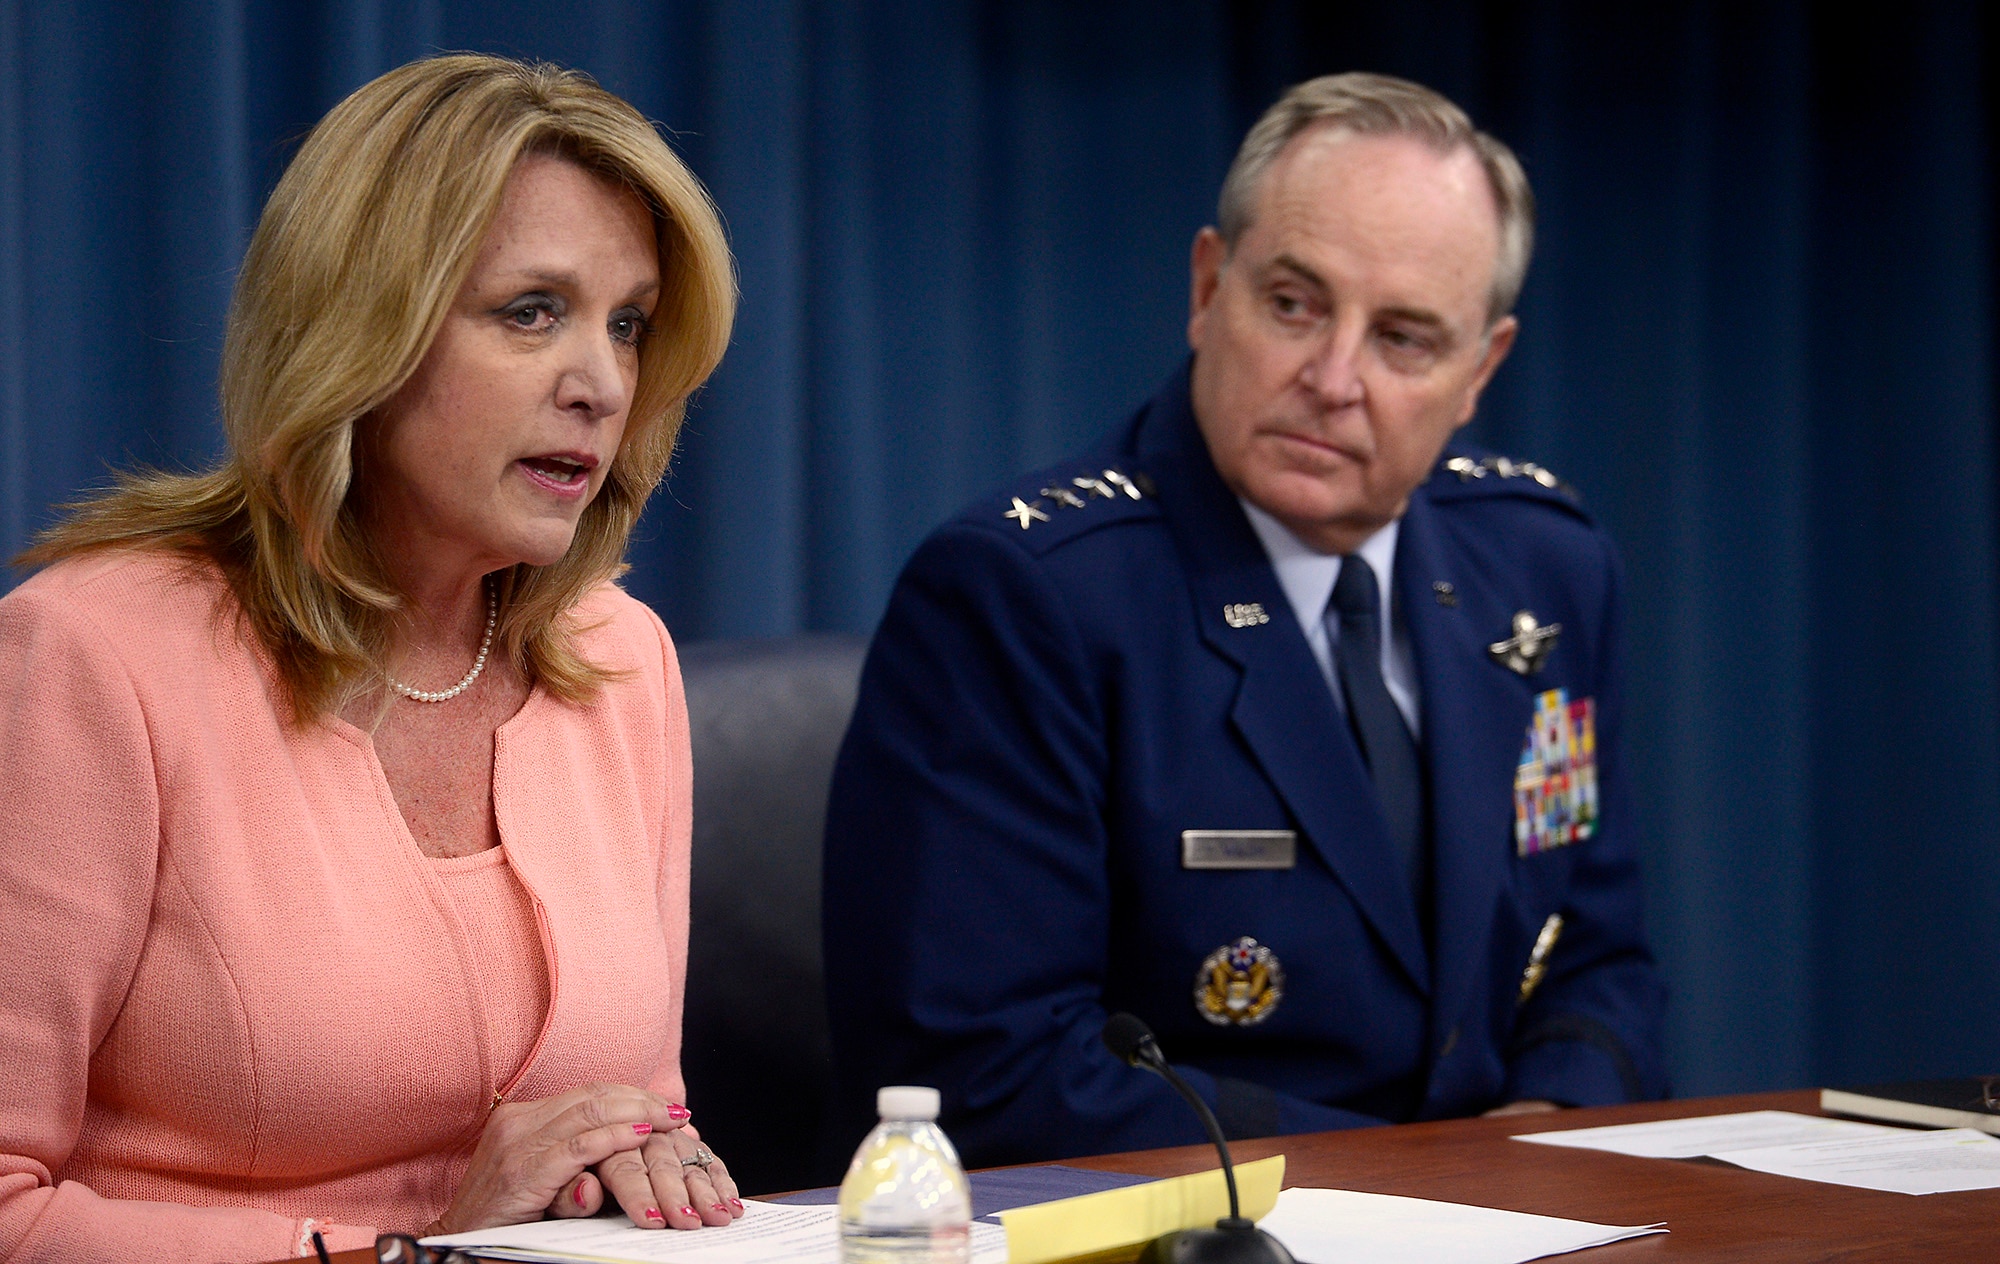 Secretary of the Air Force Deborah Lee James provides an update with Air Force Chief of Staff Gen. Mark A. Welsh III on current Air Force operations during a press briefing in the Pentagon, Aug. 24, 2015.  (U.S. Air Force photo/Scott M. Ash)